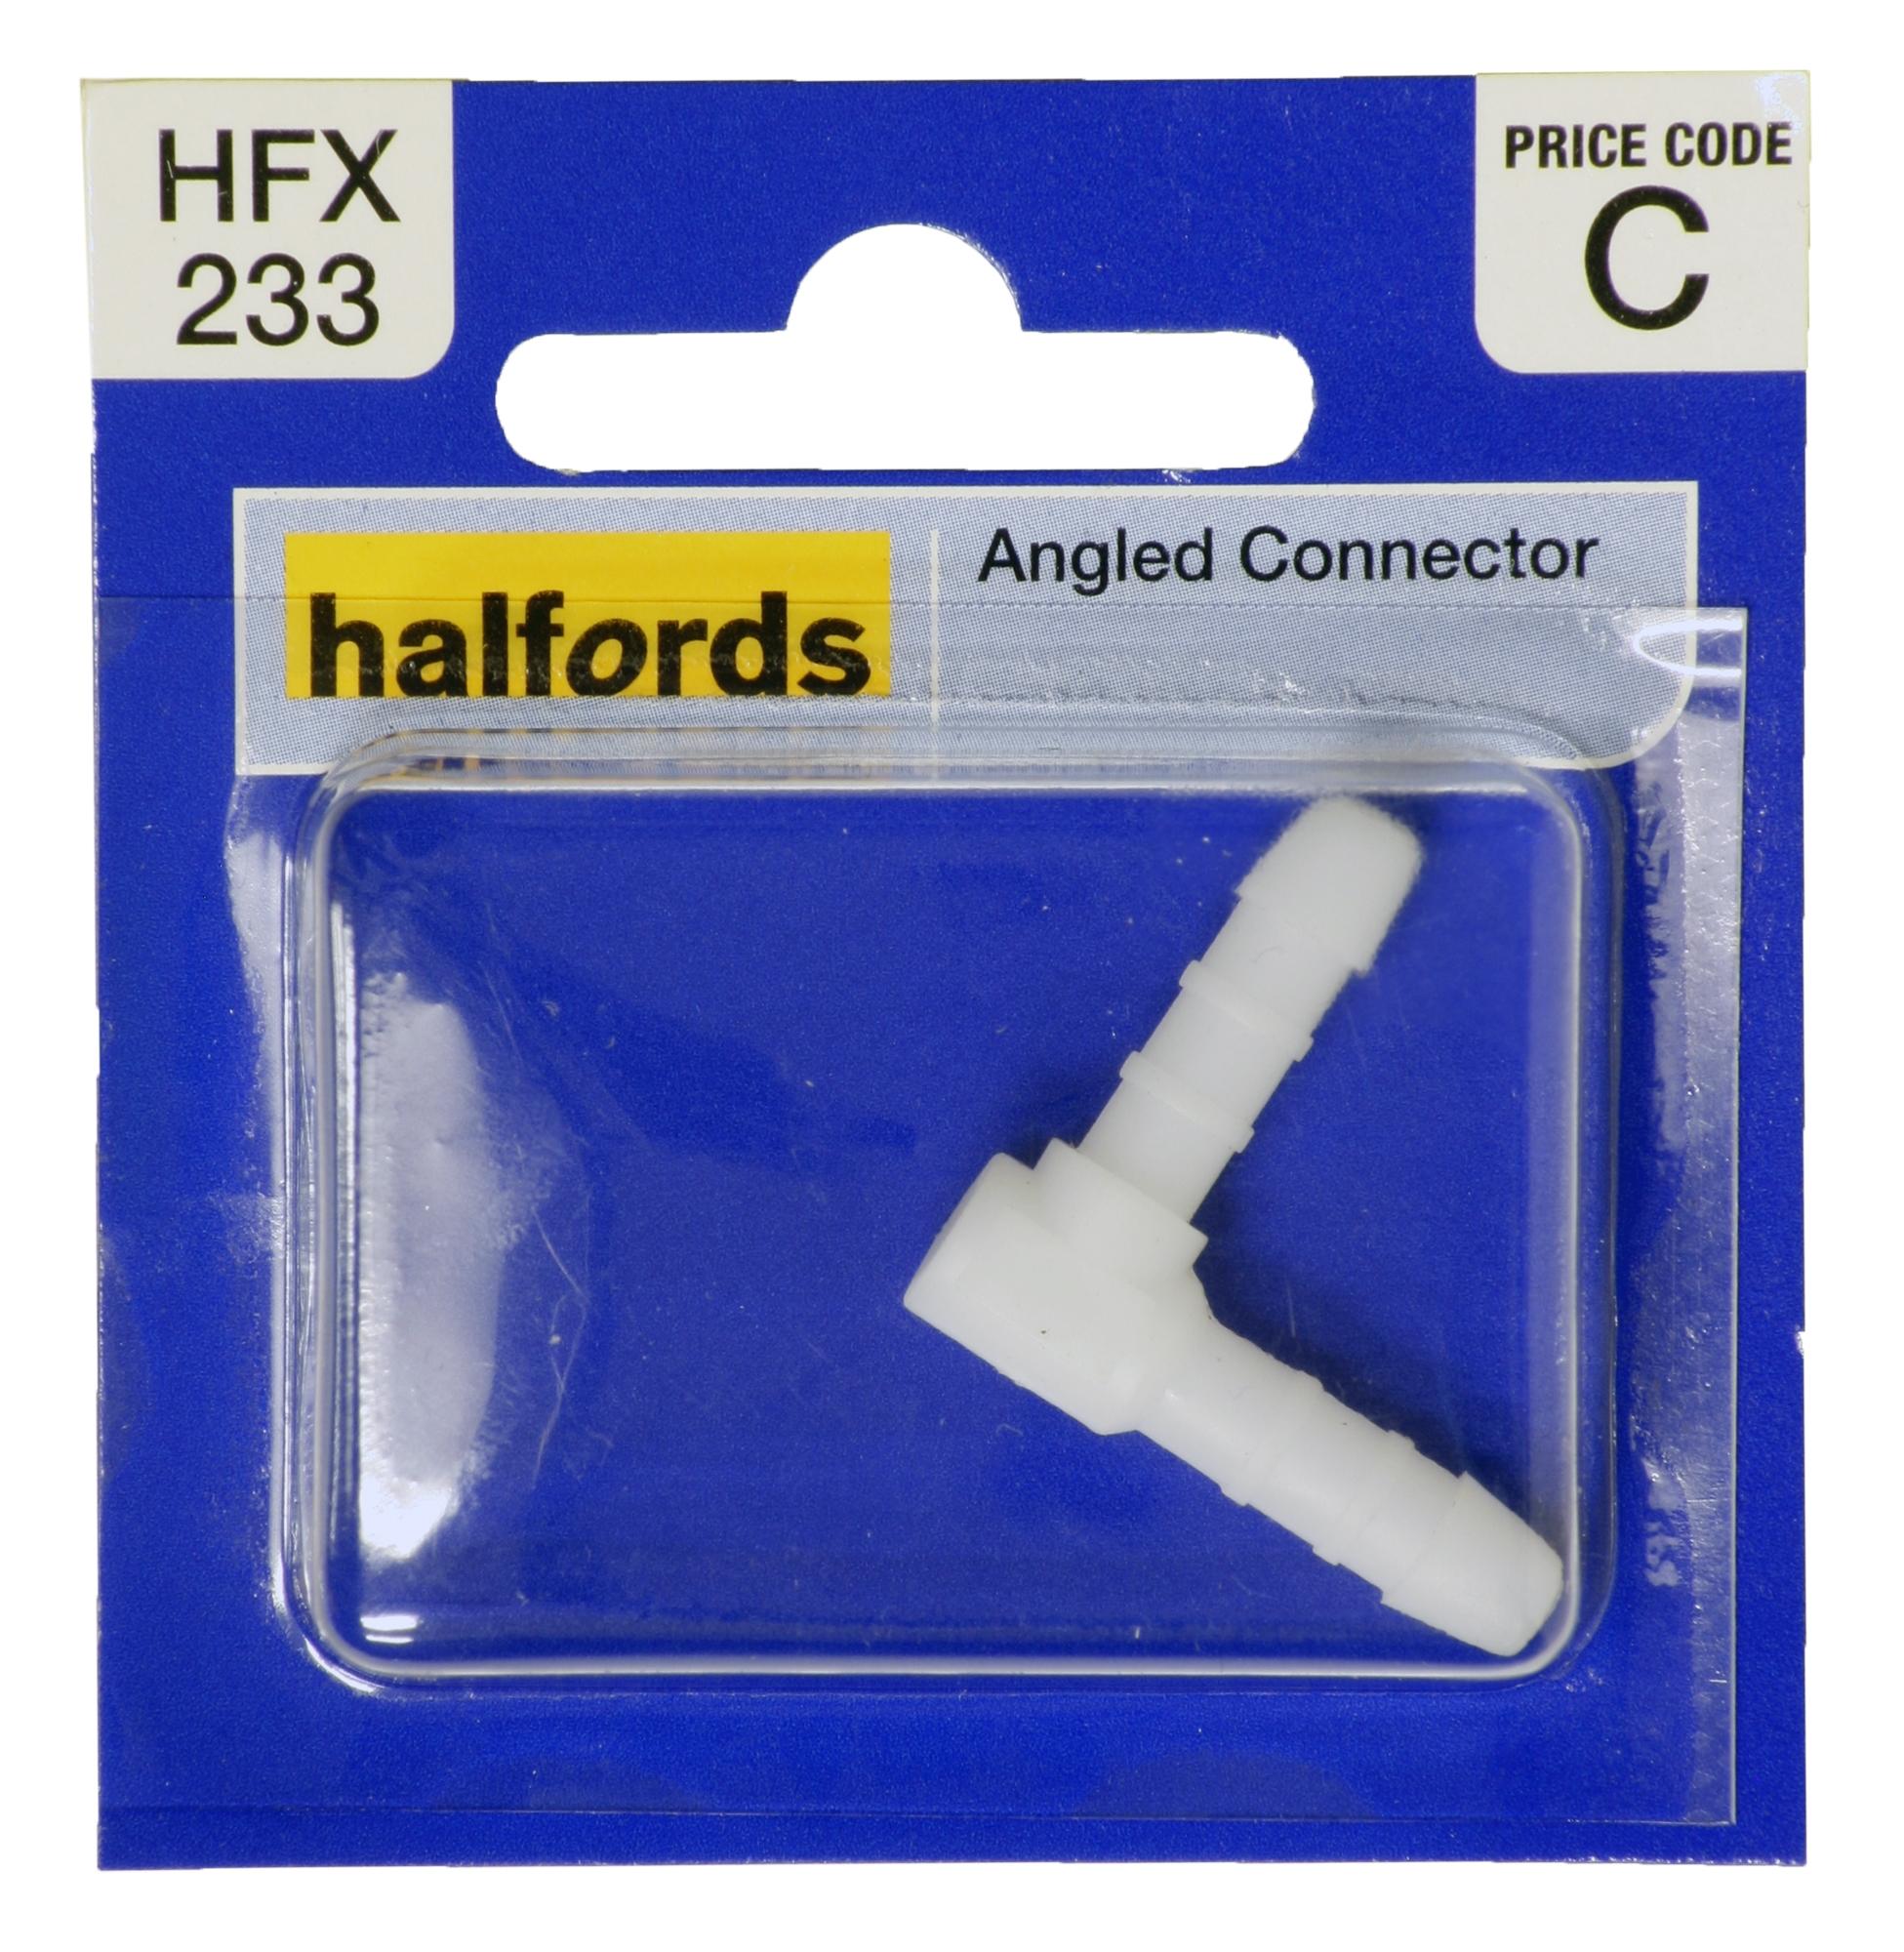 Halfords Angled Connector Hfx233